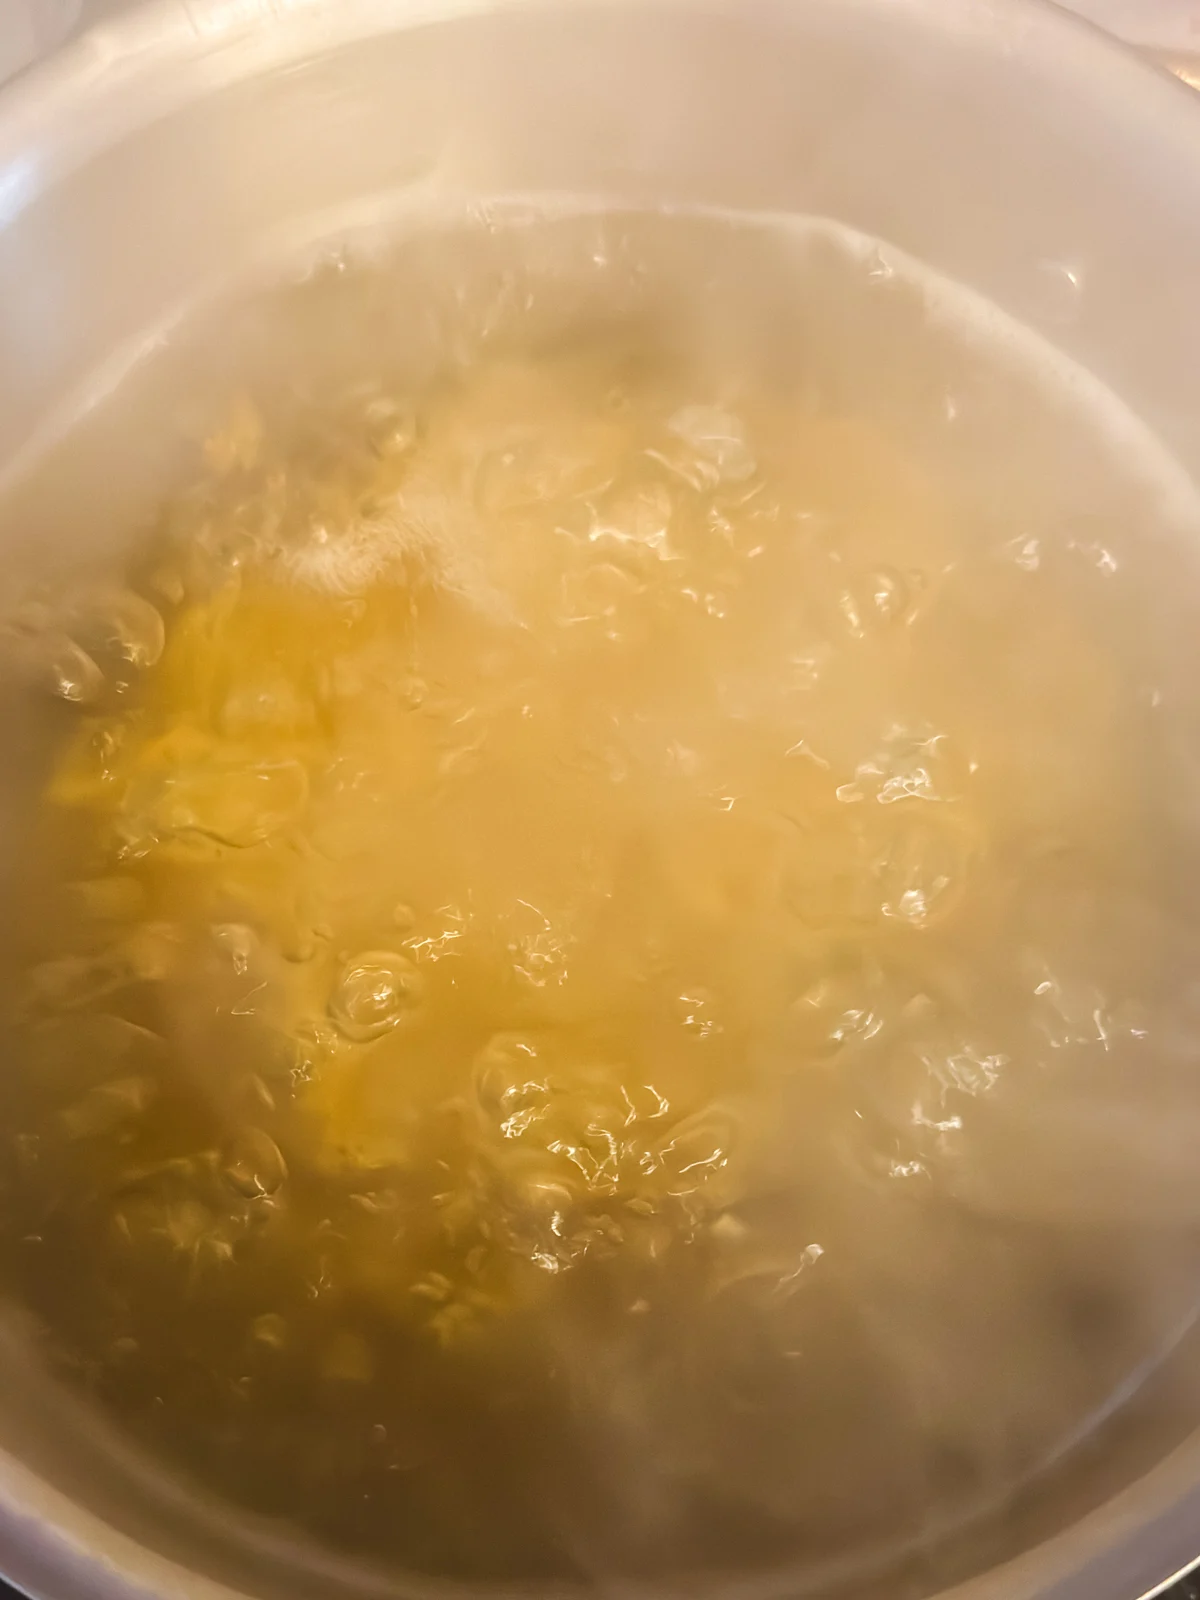 Boing macaroni in a stainless steel pot.